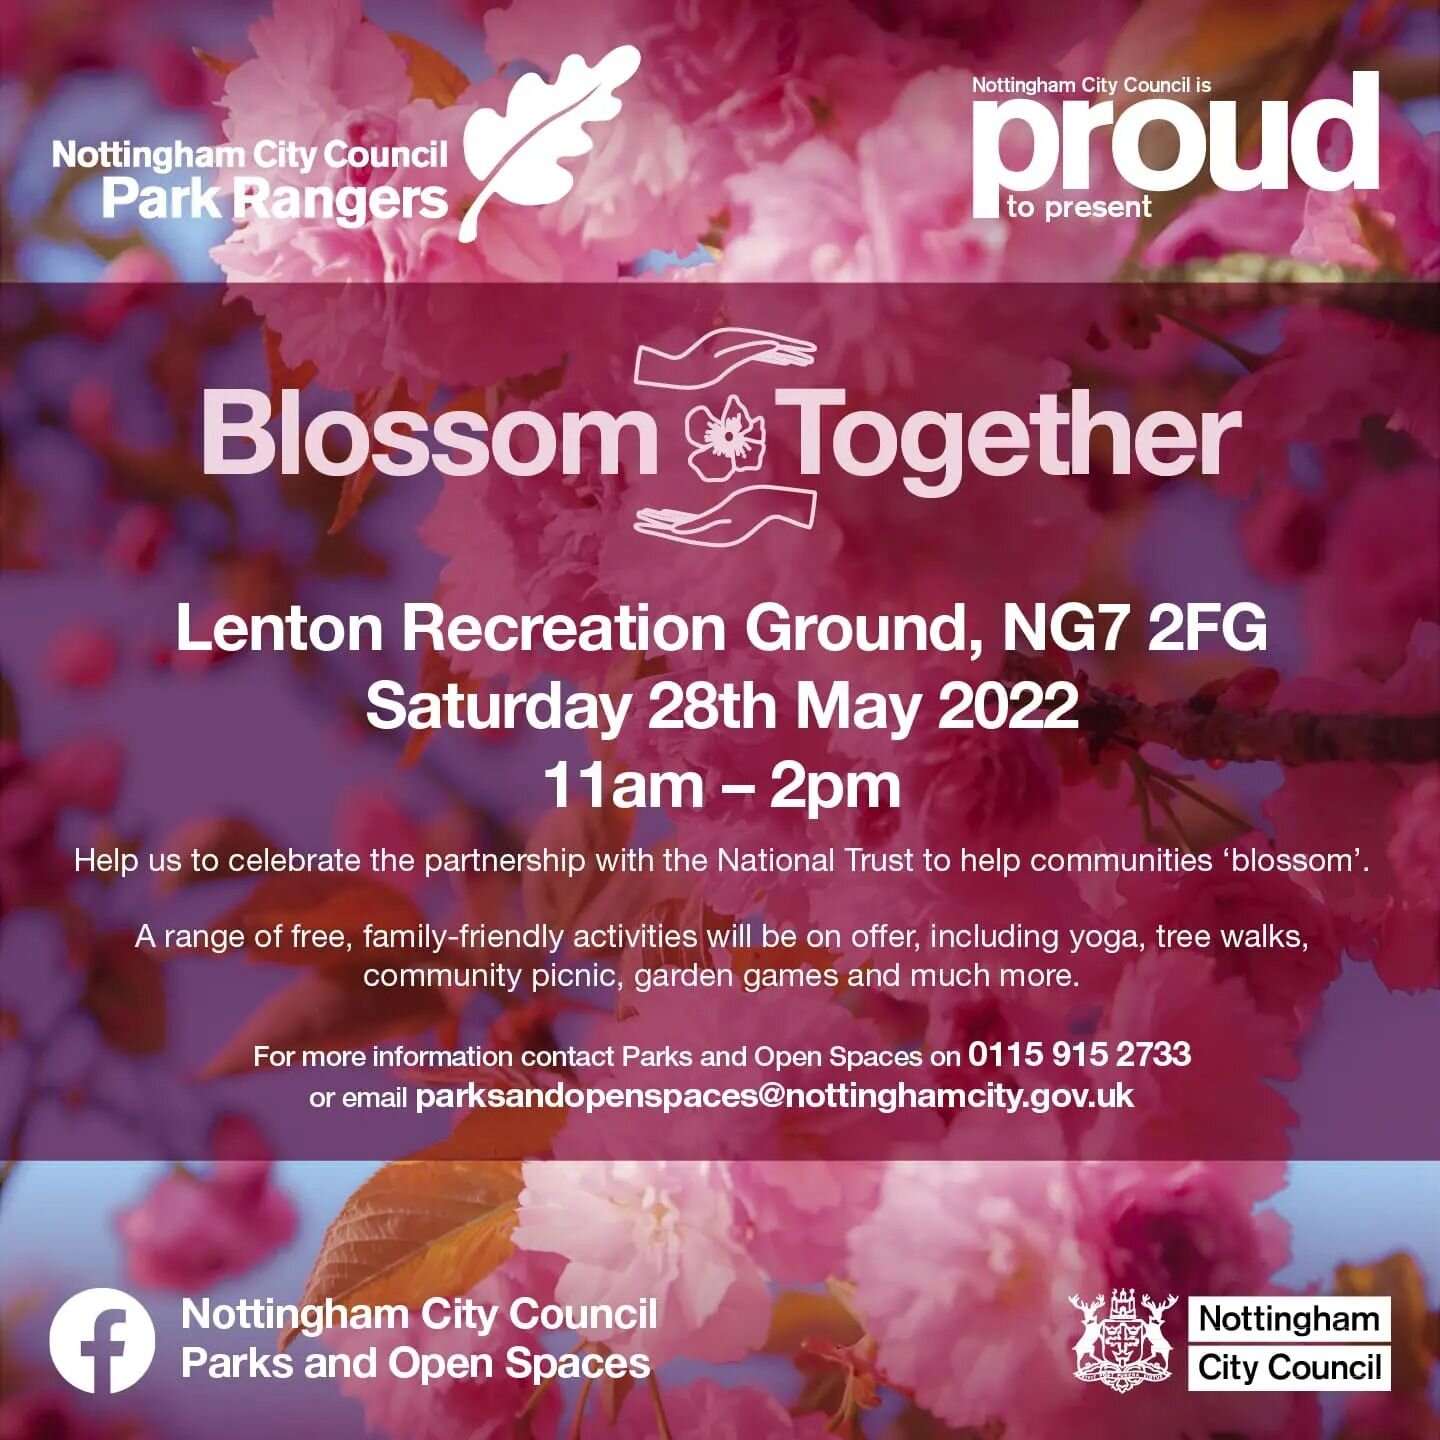 The Curious Emporium will be open as usual from 10am until 4pm today, but if you're in the Lenton area today between 11am and 2pm, our Sarah will be there too as part of the Blossom Together celebrations! 🤗 ... Blossom trees have been planted in Len